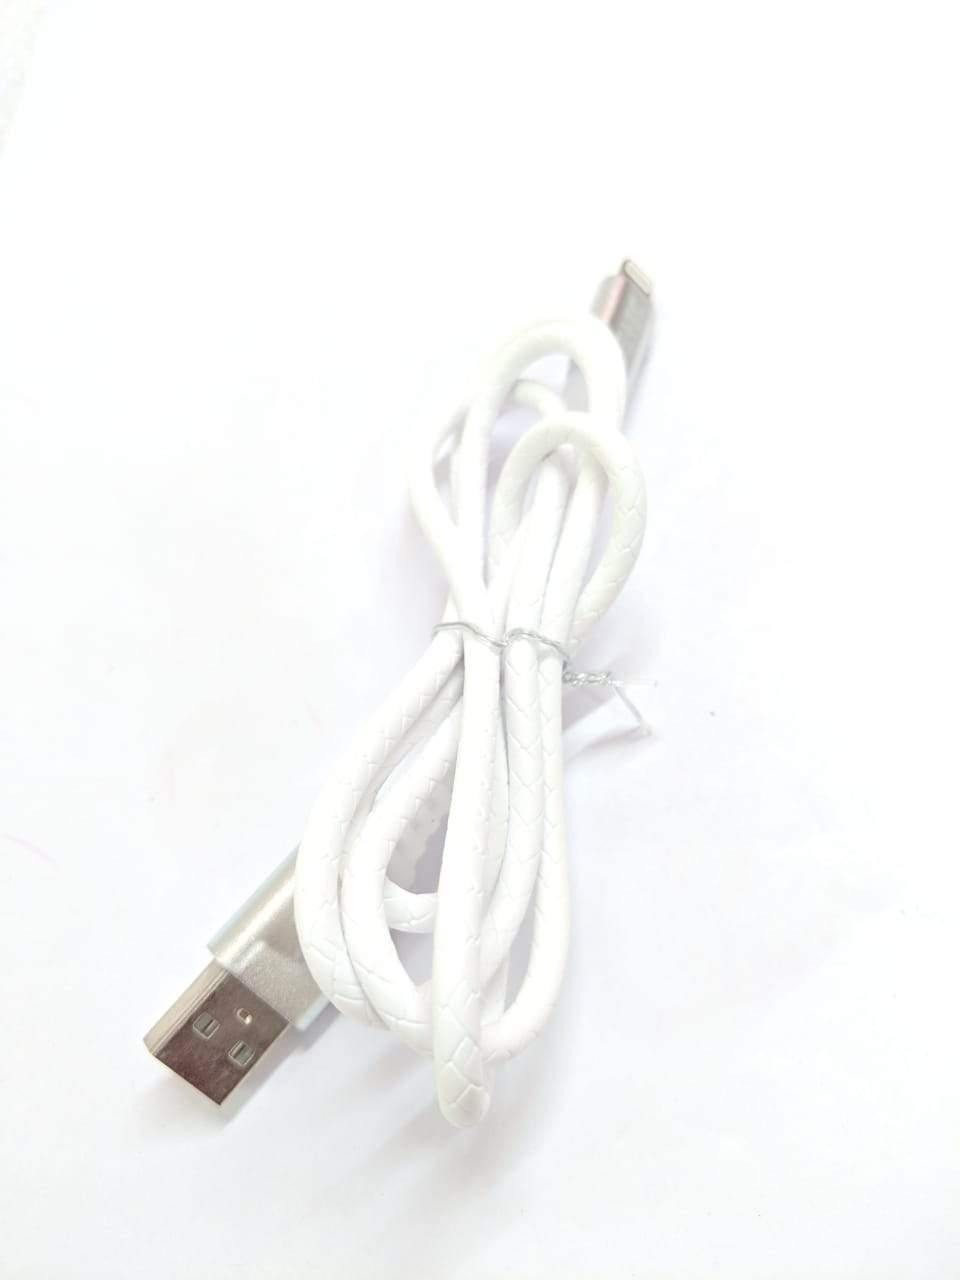 Detec Data Cable. Lightning Port - USB 2.0 - Apple port - Detech Devices Private Limited